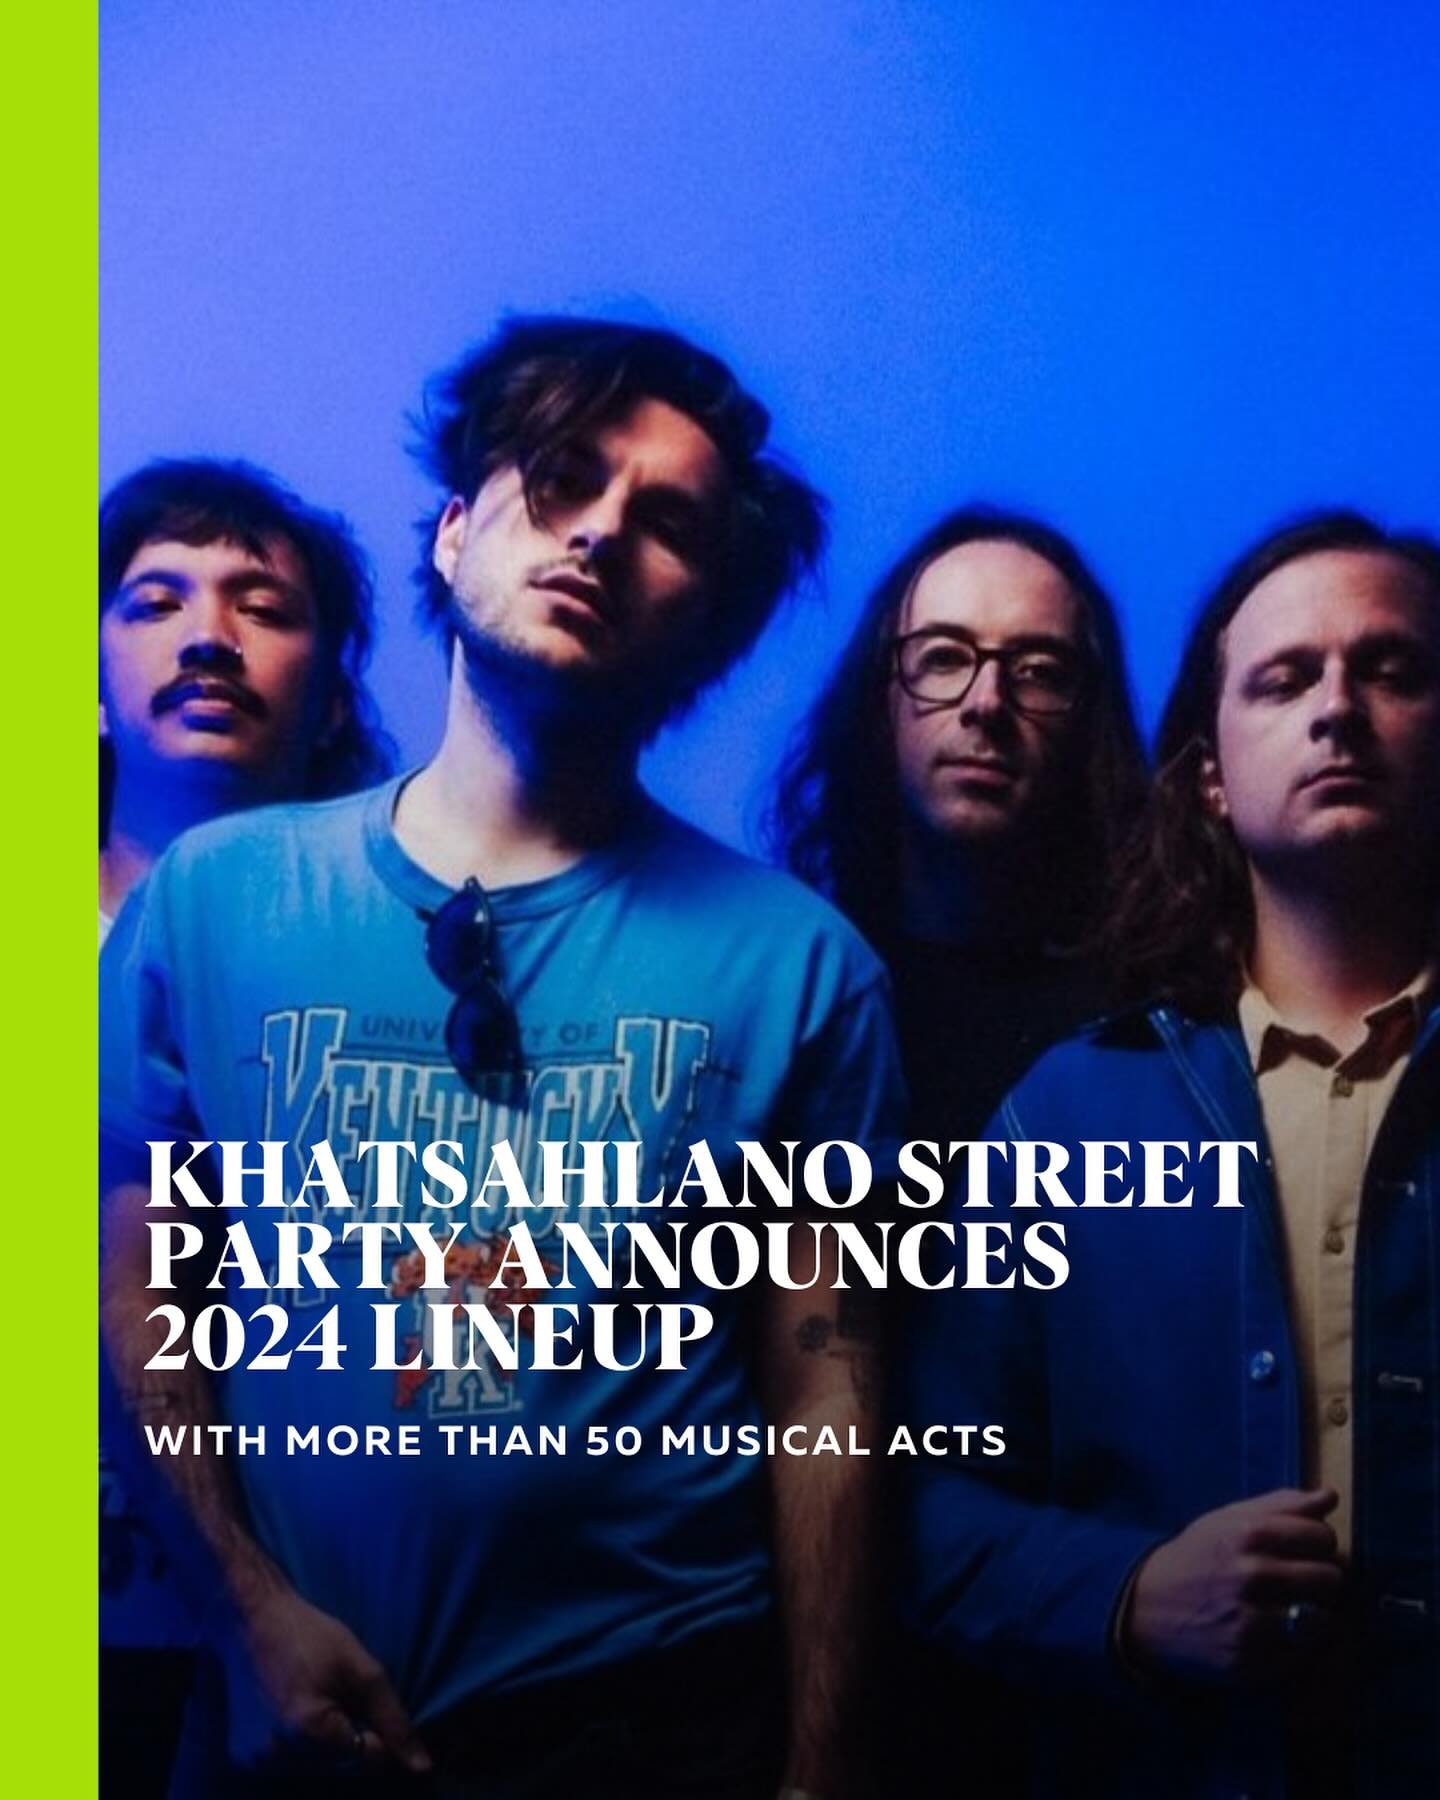 Zulu Records has curated diverse local lineup for the July 6 event, including Hotel Mira, Babe Corner, and NADUH. 

Head to Stir to check out @khatsahlano&rsquo;s 2024 lineup! 

#khatsahlano #khatsalanostreetparty #kitsilano #yvrevents #yvrmusic #hot